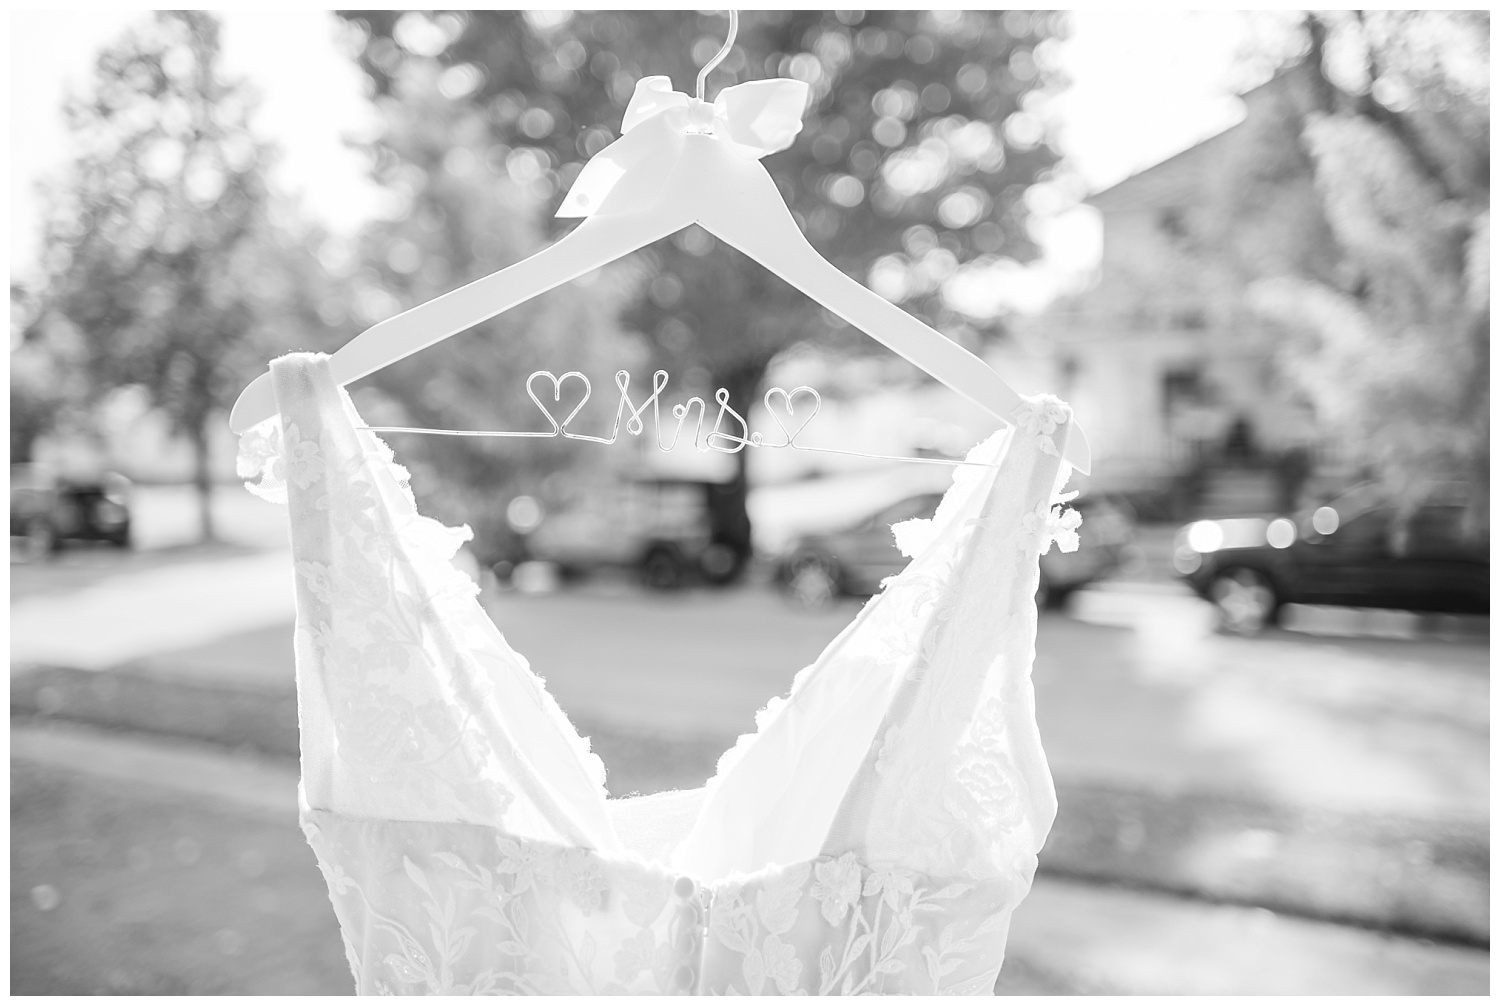 detail of wooden wedding hanger with lace dress 